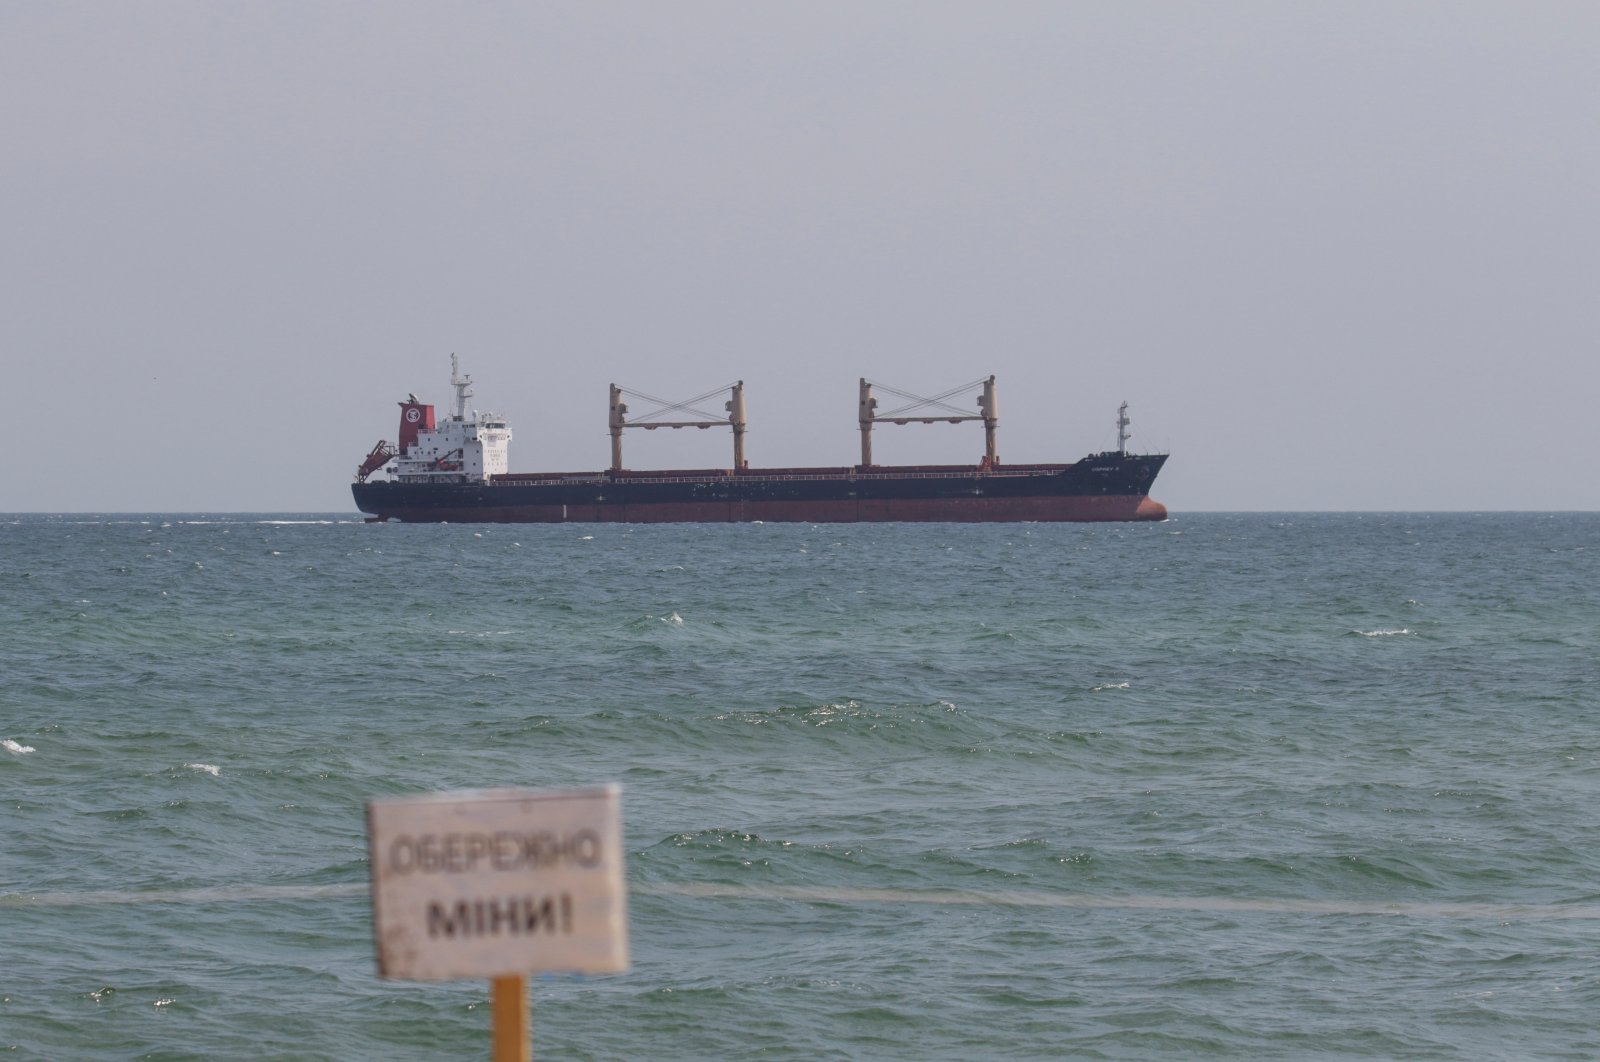 A warning sign that reads &quot;Caution! Mines!&quot; is seen as the Liberian-flagged bulk carrier Osprey S arrives near the port in Chornomorsk after restarting grain export, Ukraine, Aug. 10, 2022. (Reuters Photo)